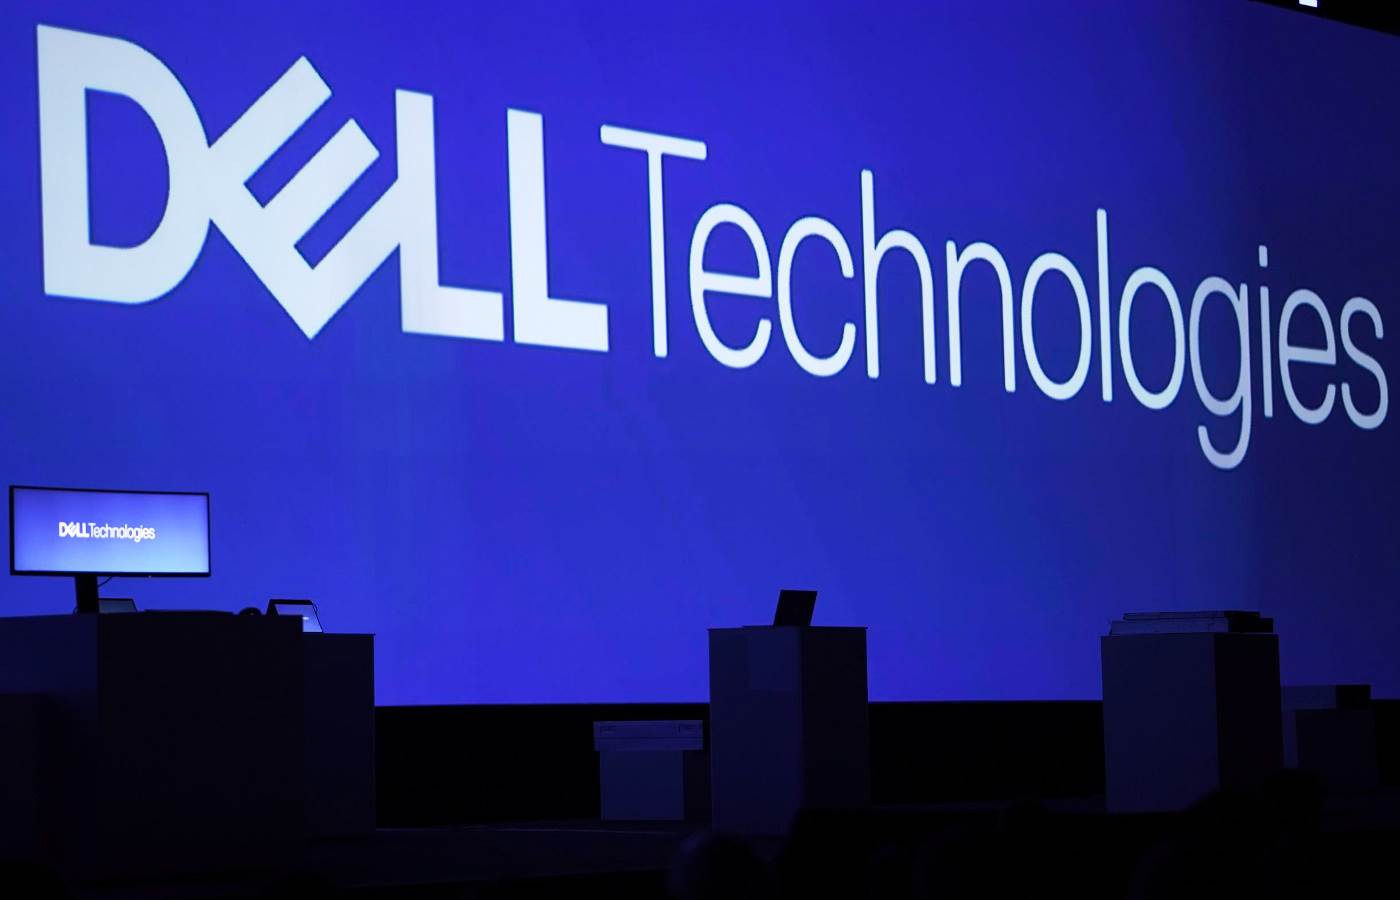 Dell Technologies offre nuovi display industriali touchscreen thumbnail